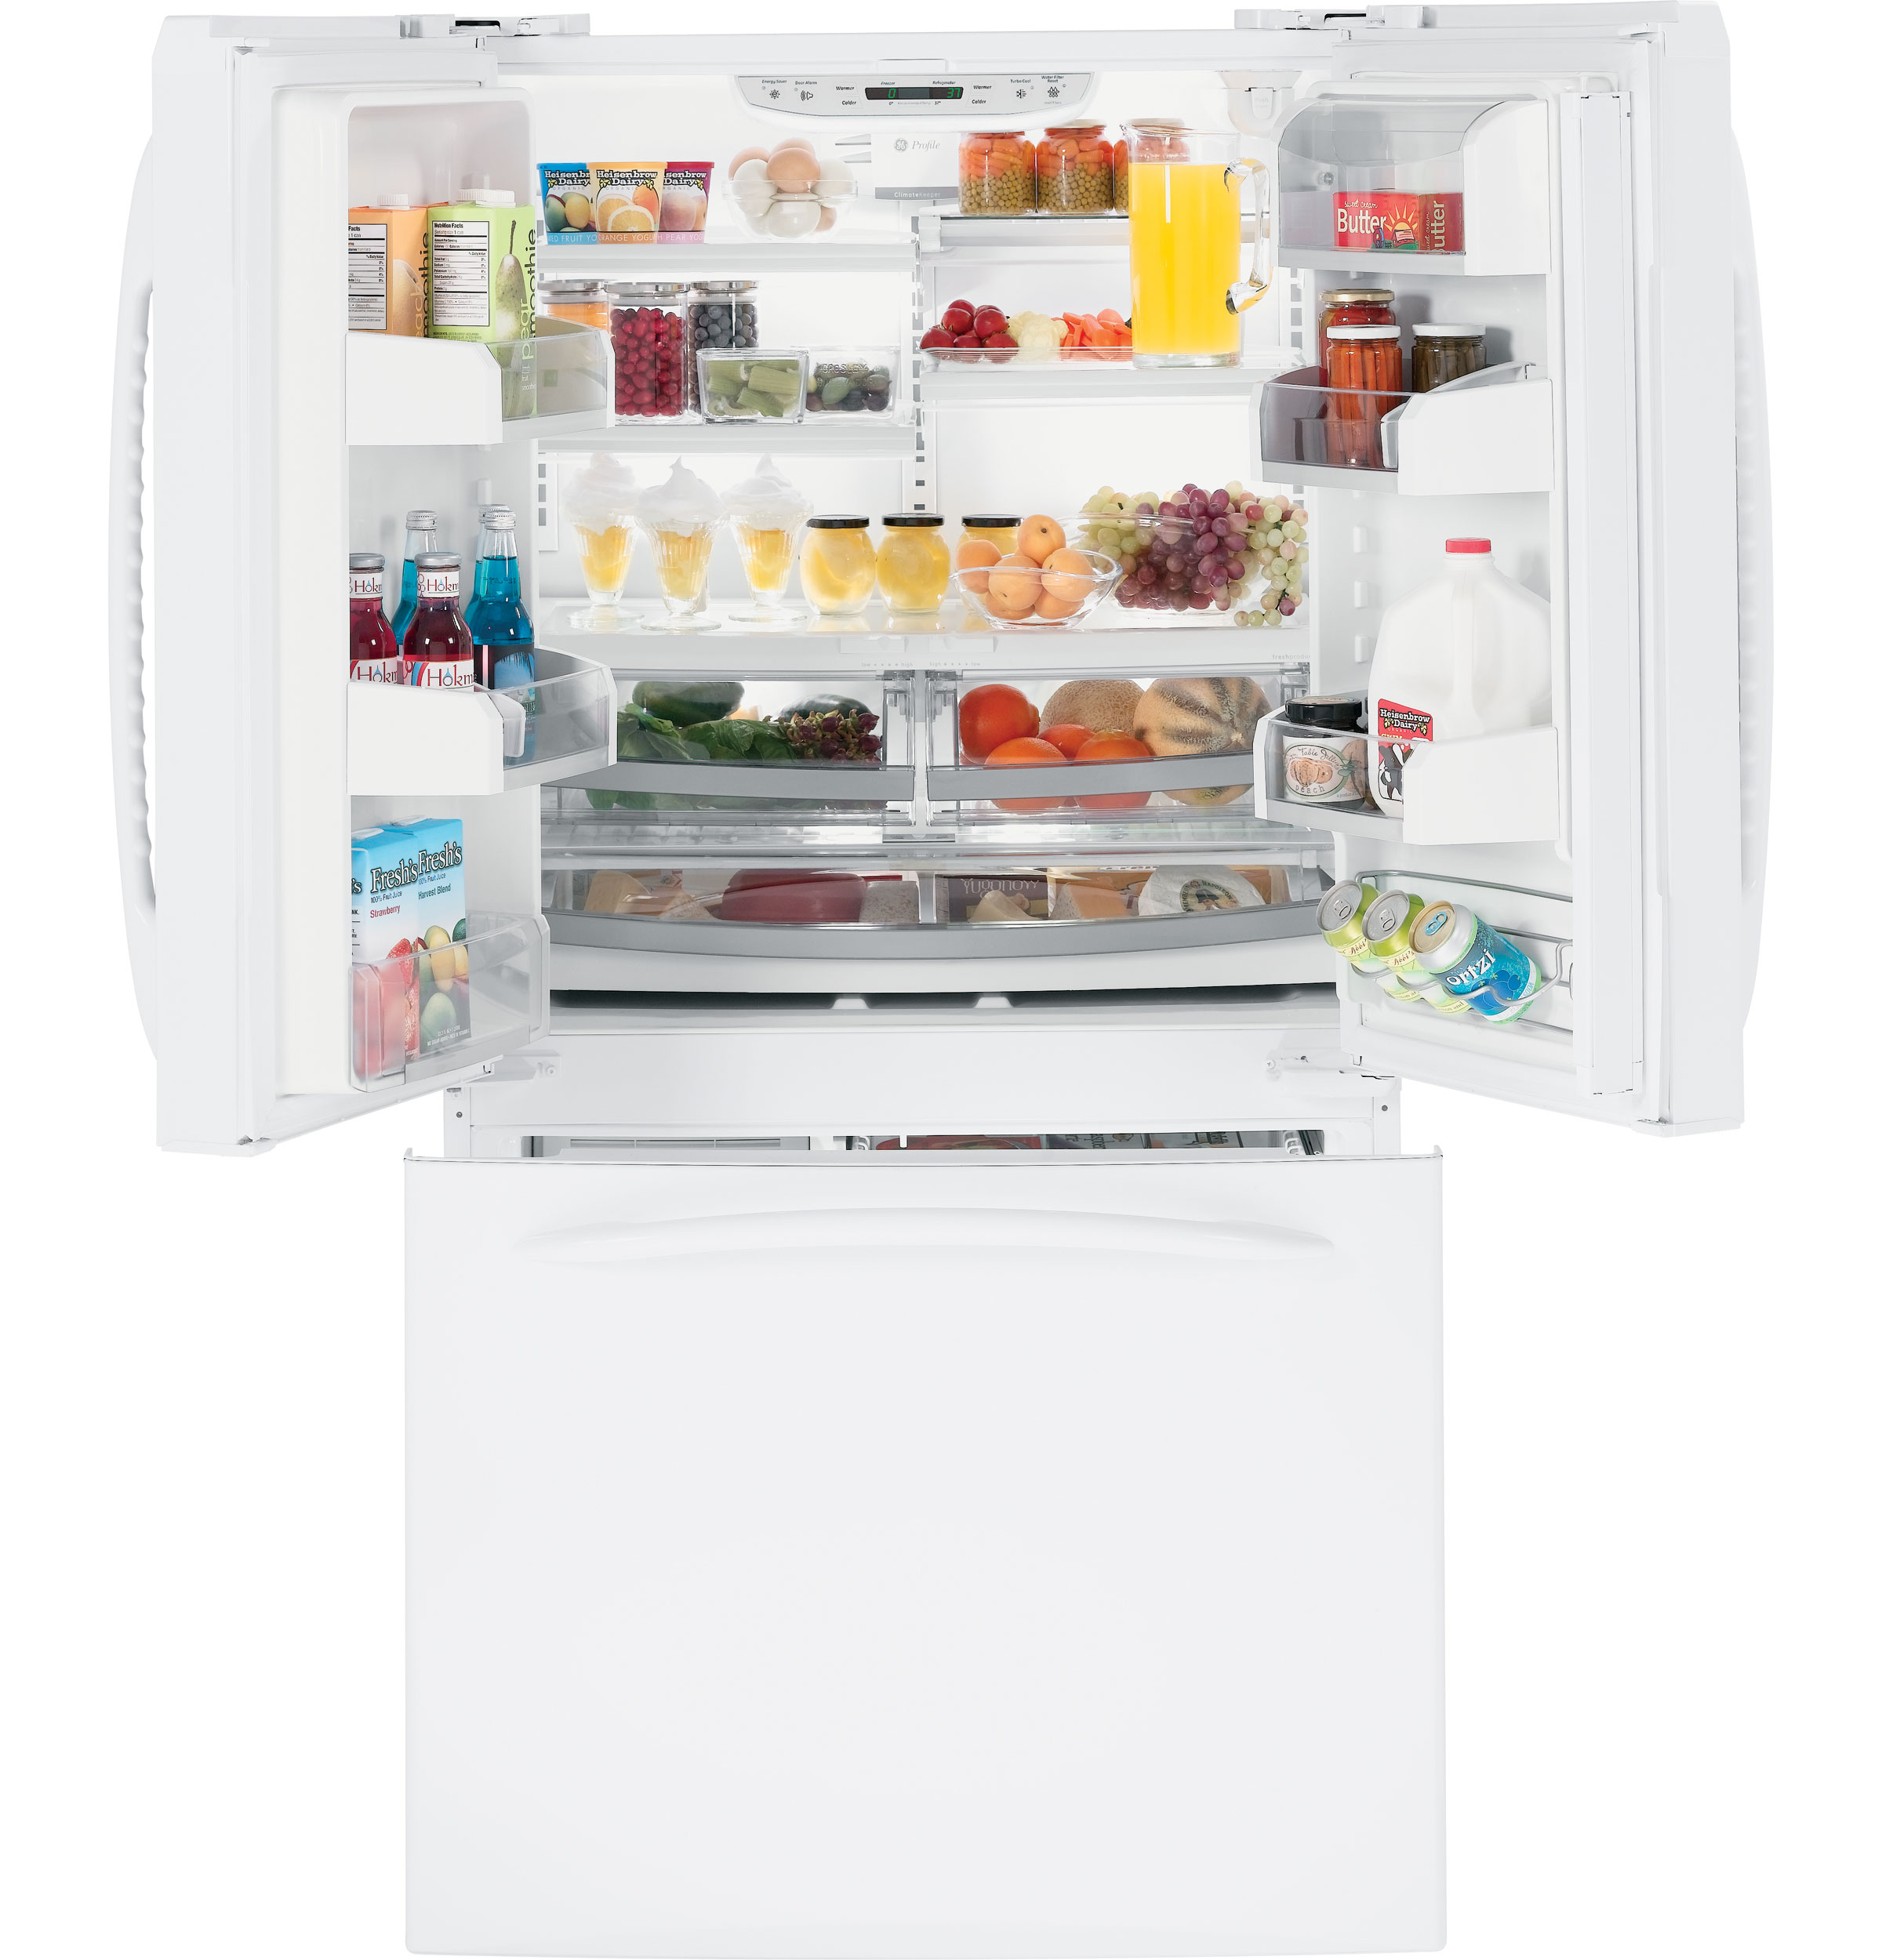 GE Profile™ ENERGY STAR® 25.1 Cu. Ft. French-Door Refrigerator with Icemaker